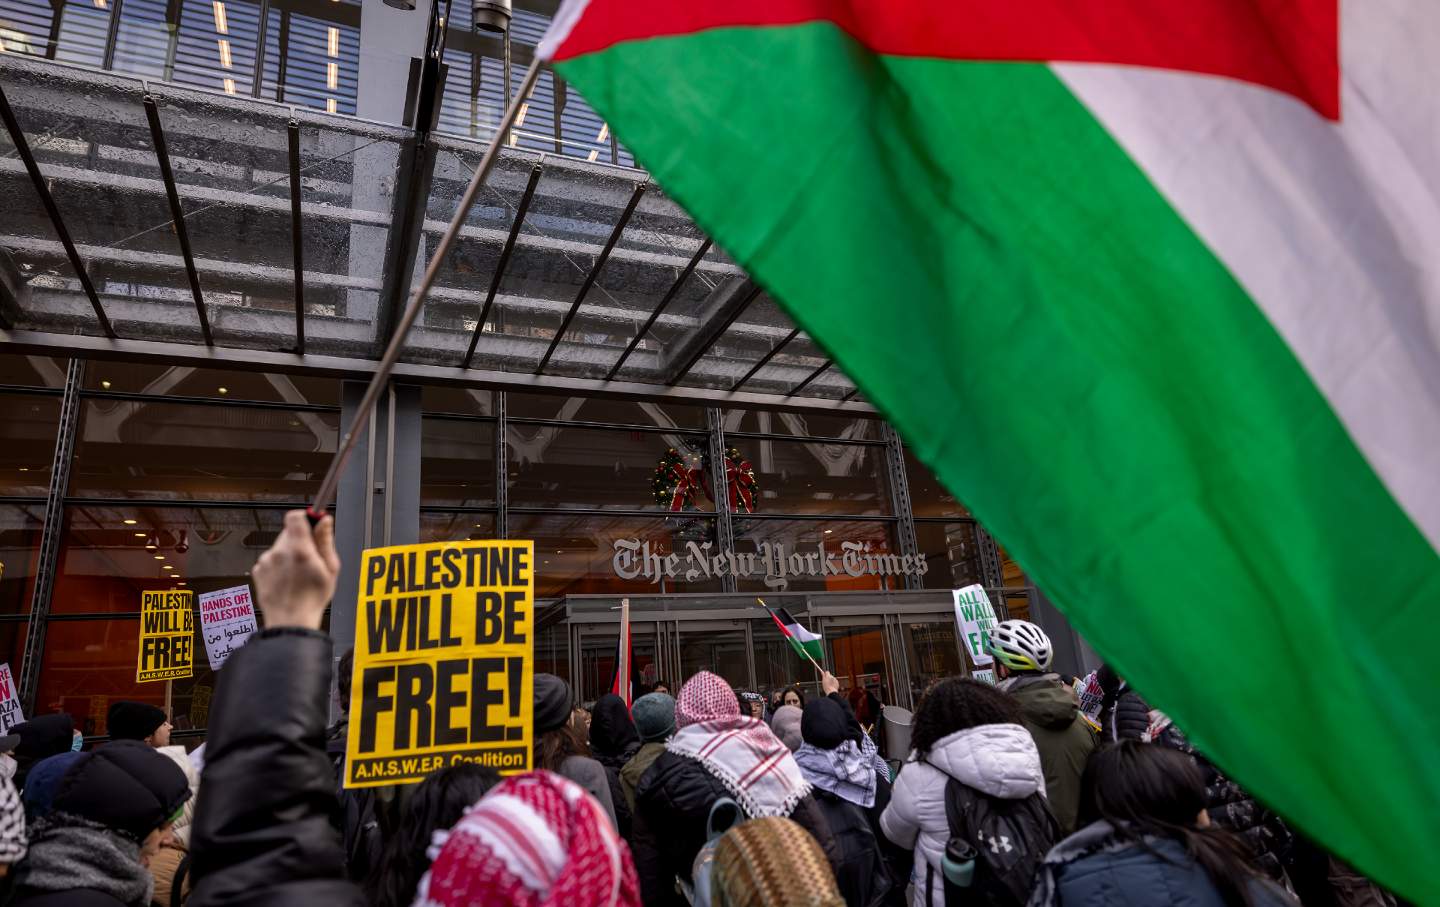 Pro-Palestine protesters gather outside the offices of The New York Times to challenge the newspaper's coverage of the Israel-Gaza war during a global call to 